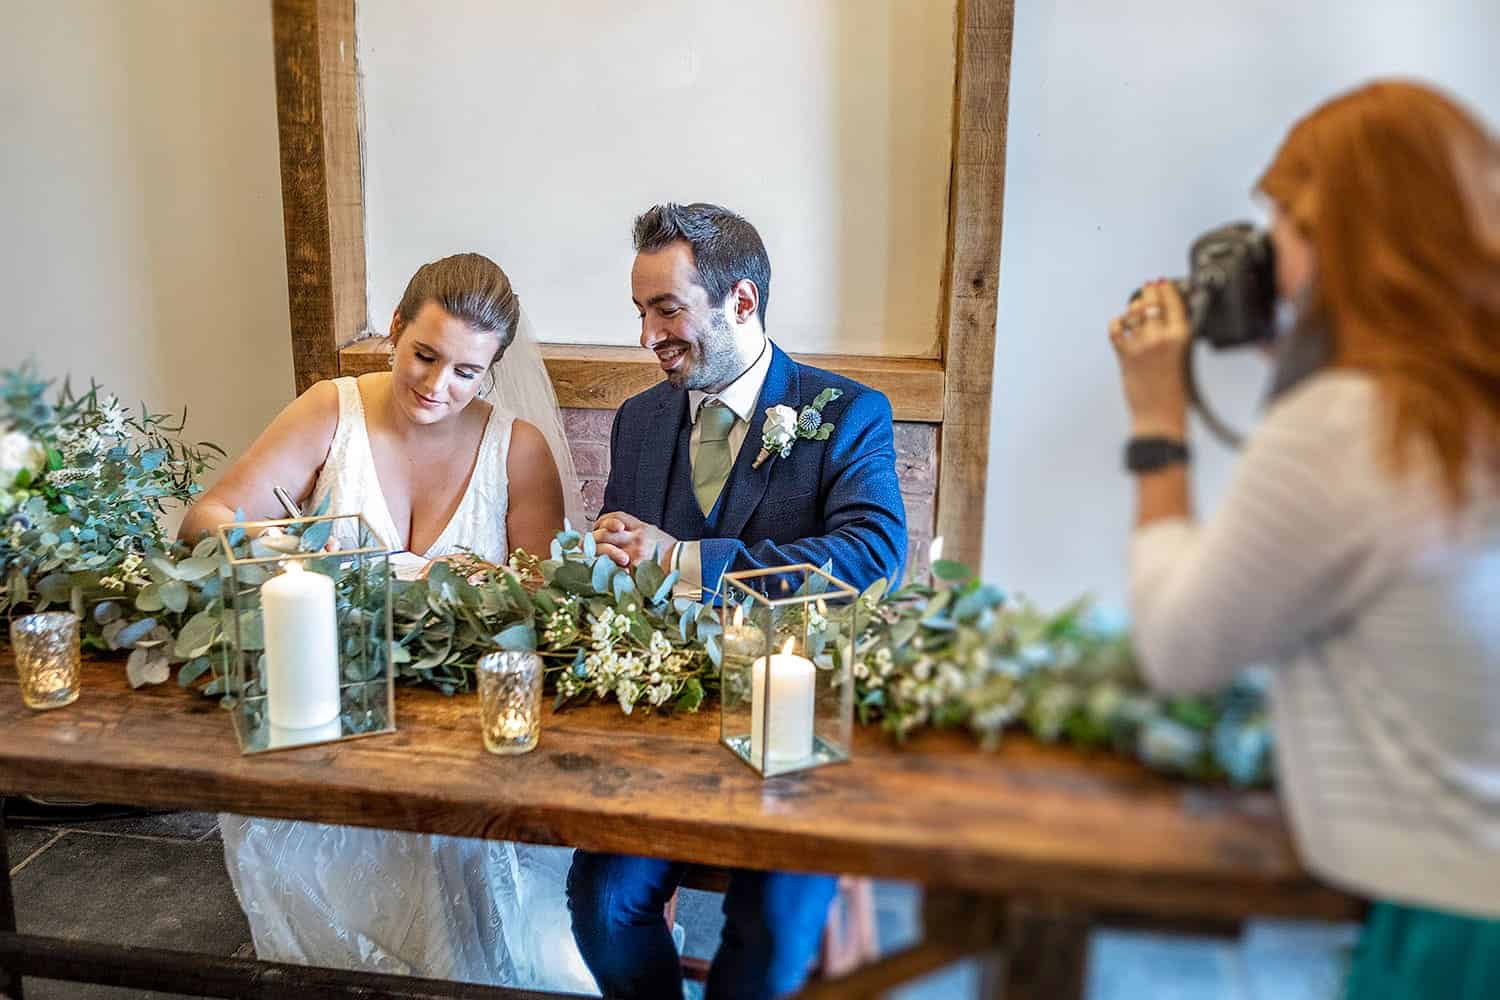 The Old Dairy Barn is a exceptional place to share your vows